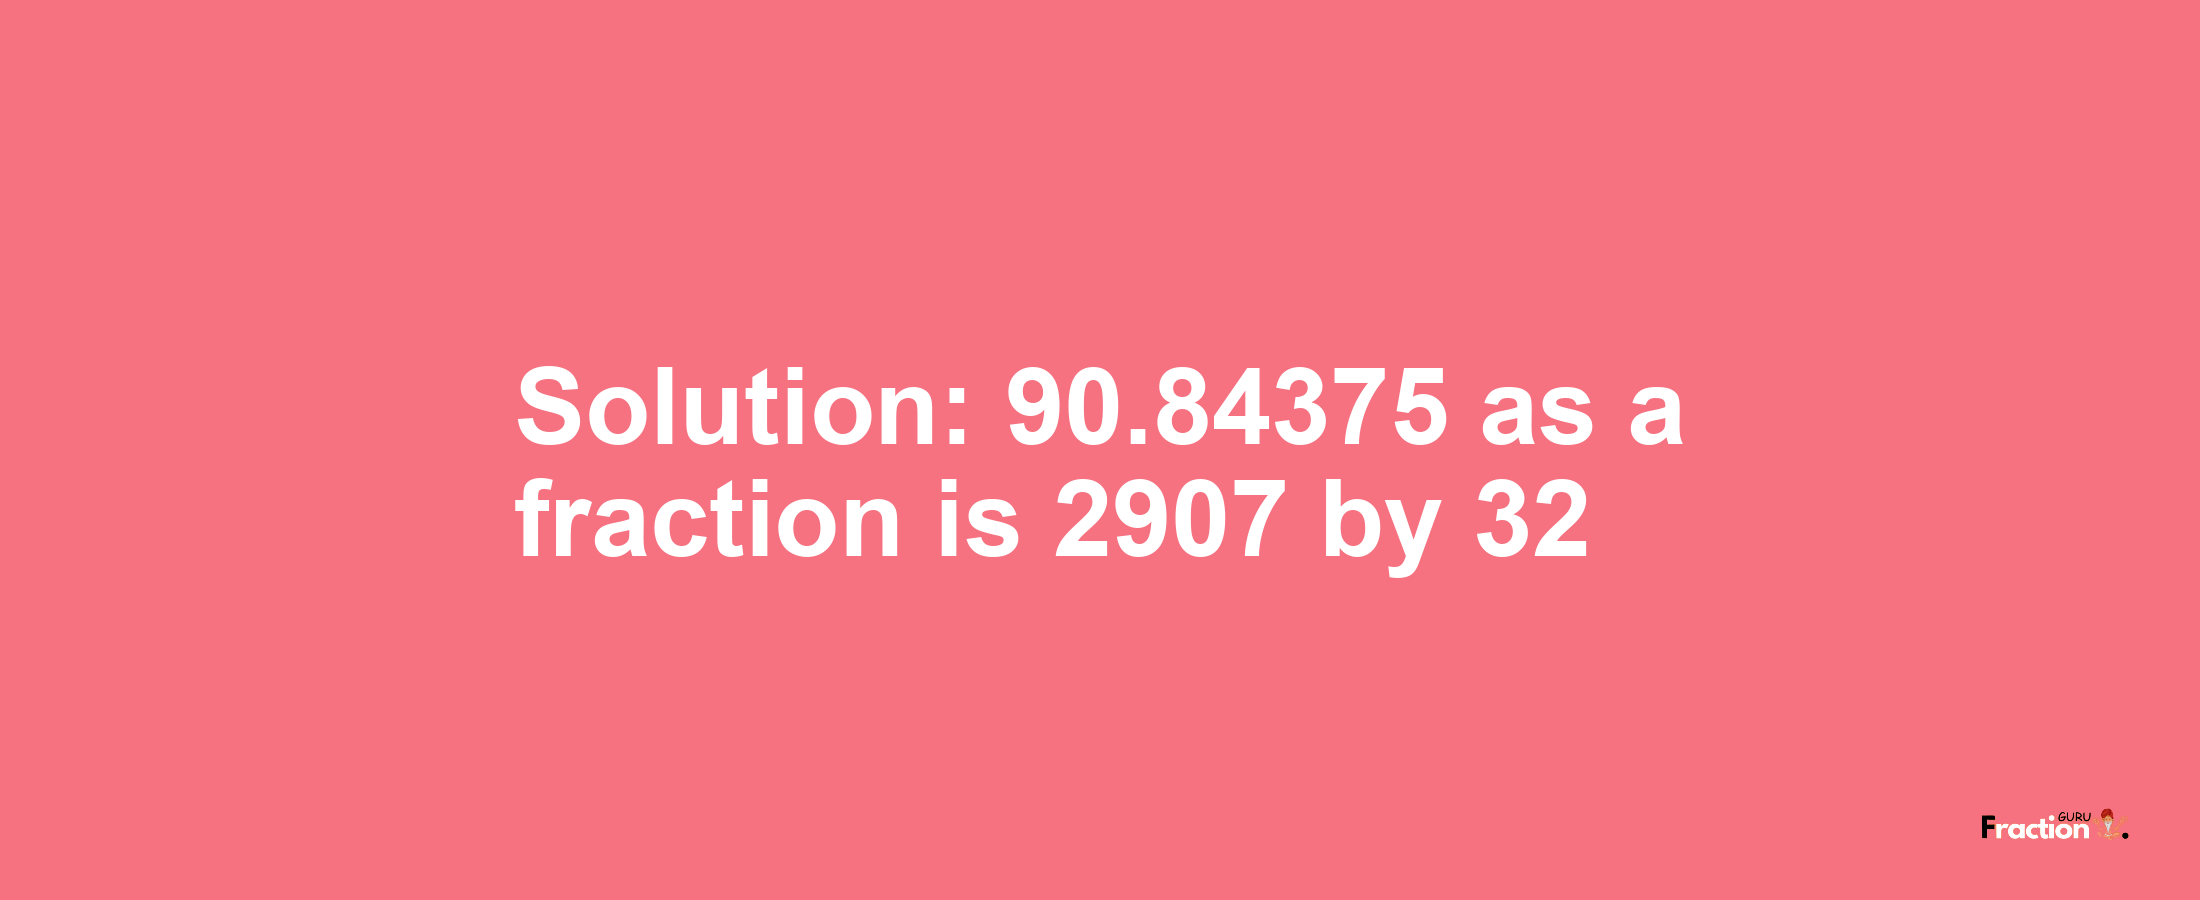 Solution:90.84375 as a fraction is 2907/32